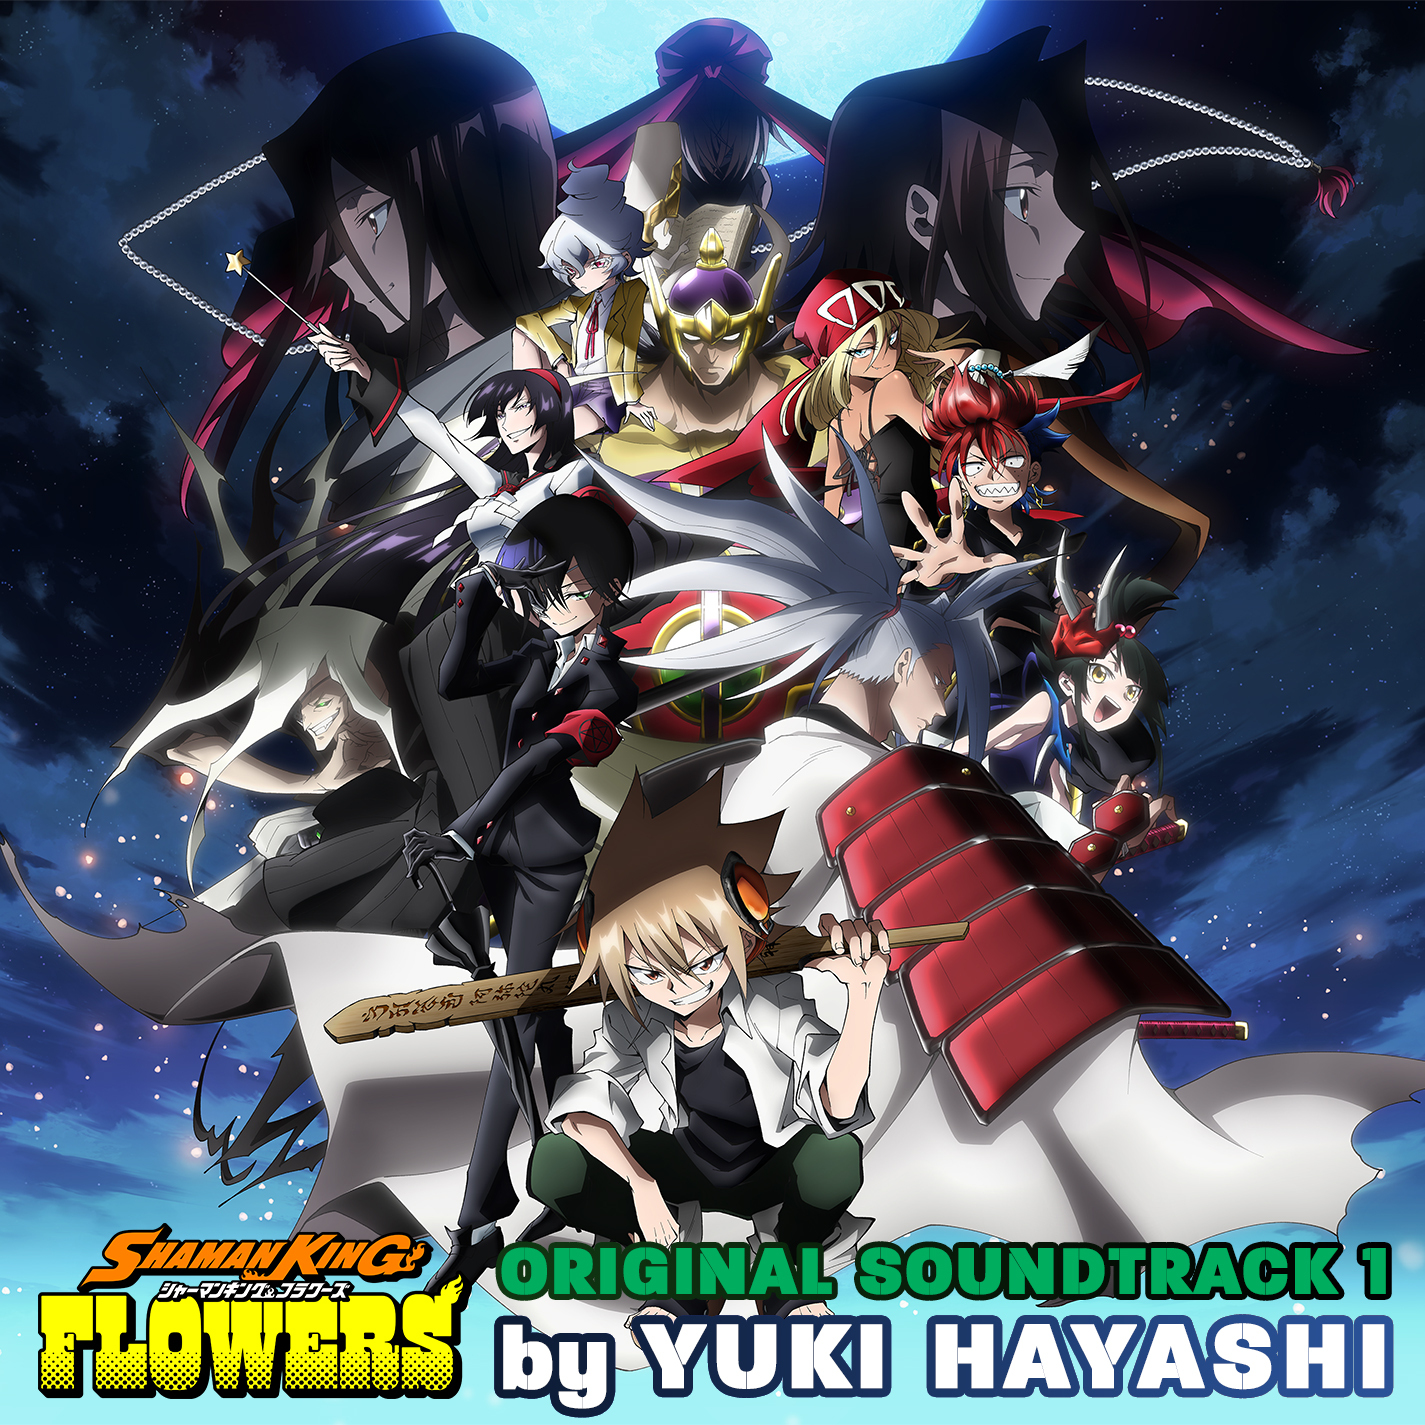 「SHAMAN KING FLOWERS」ORIGINAL SOUNDTRACK VOL.1 is distributed today!